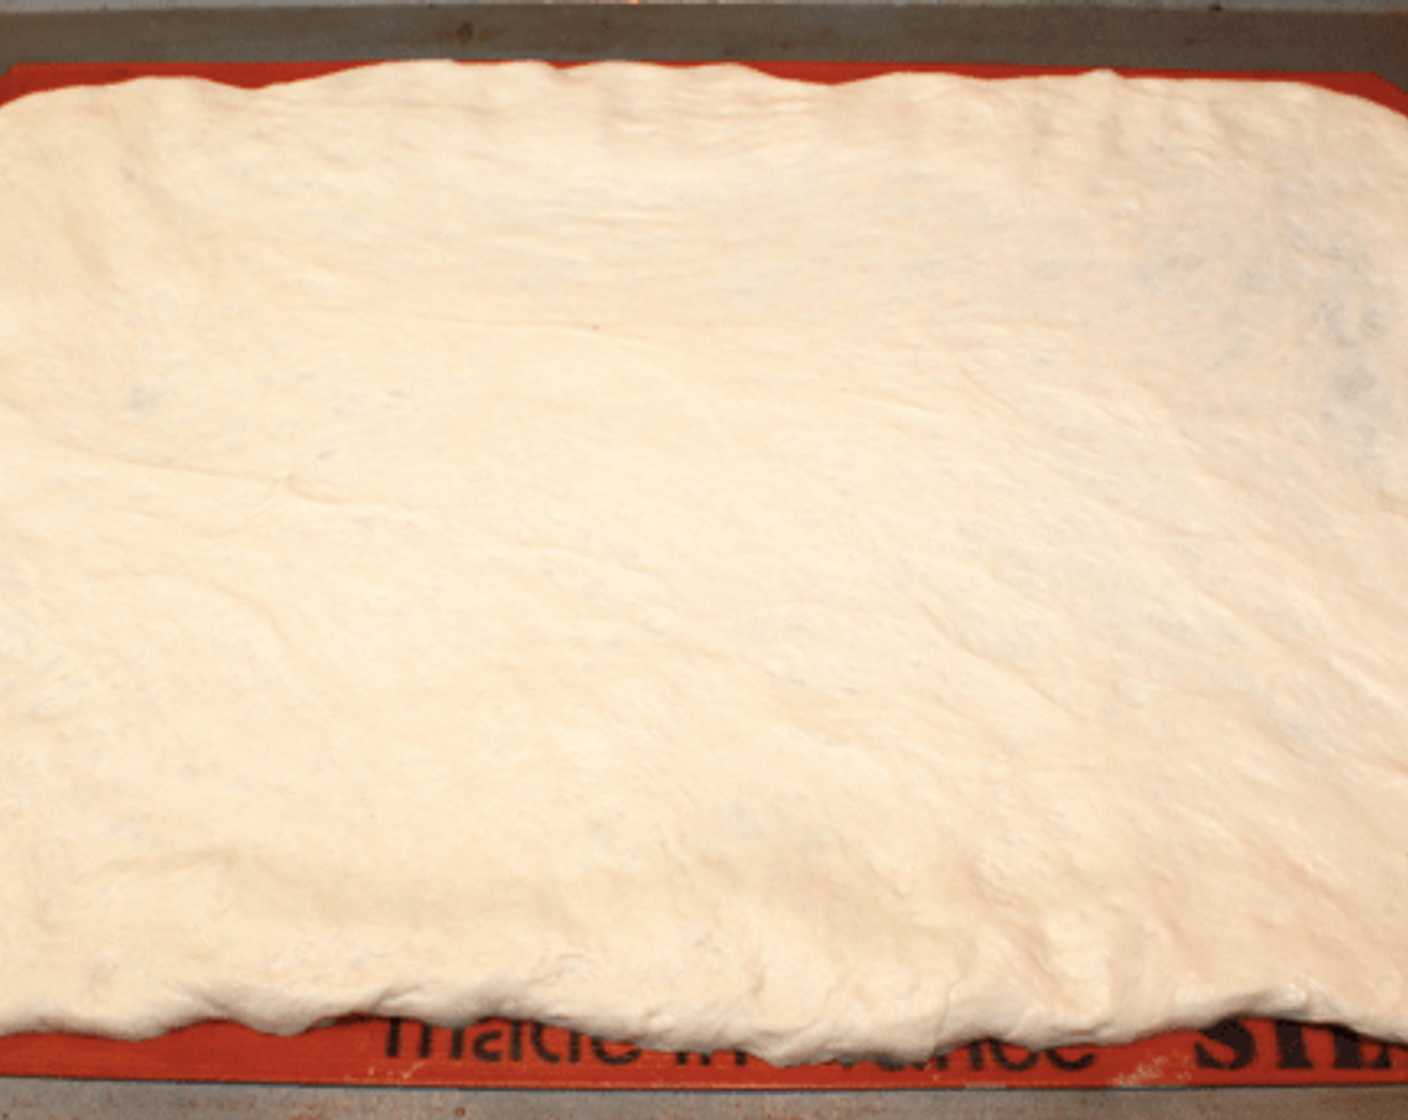 step 2 Stretch the Pizza Dough (1 lb) to roughly 11 X 16 inches or the size of a Silpat half-sheet liner. Make sure the Silpat is on a metal baking sheet.